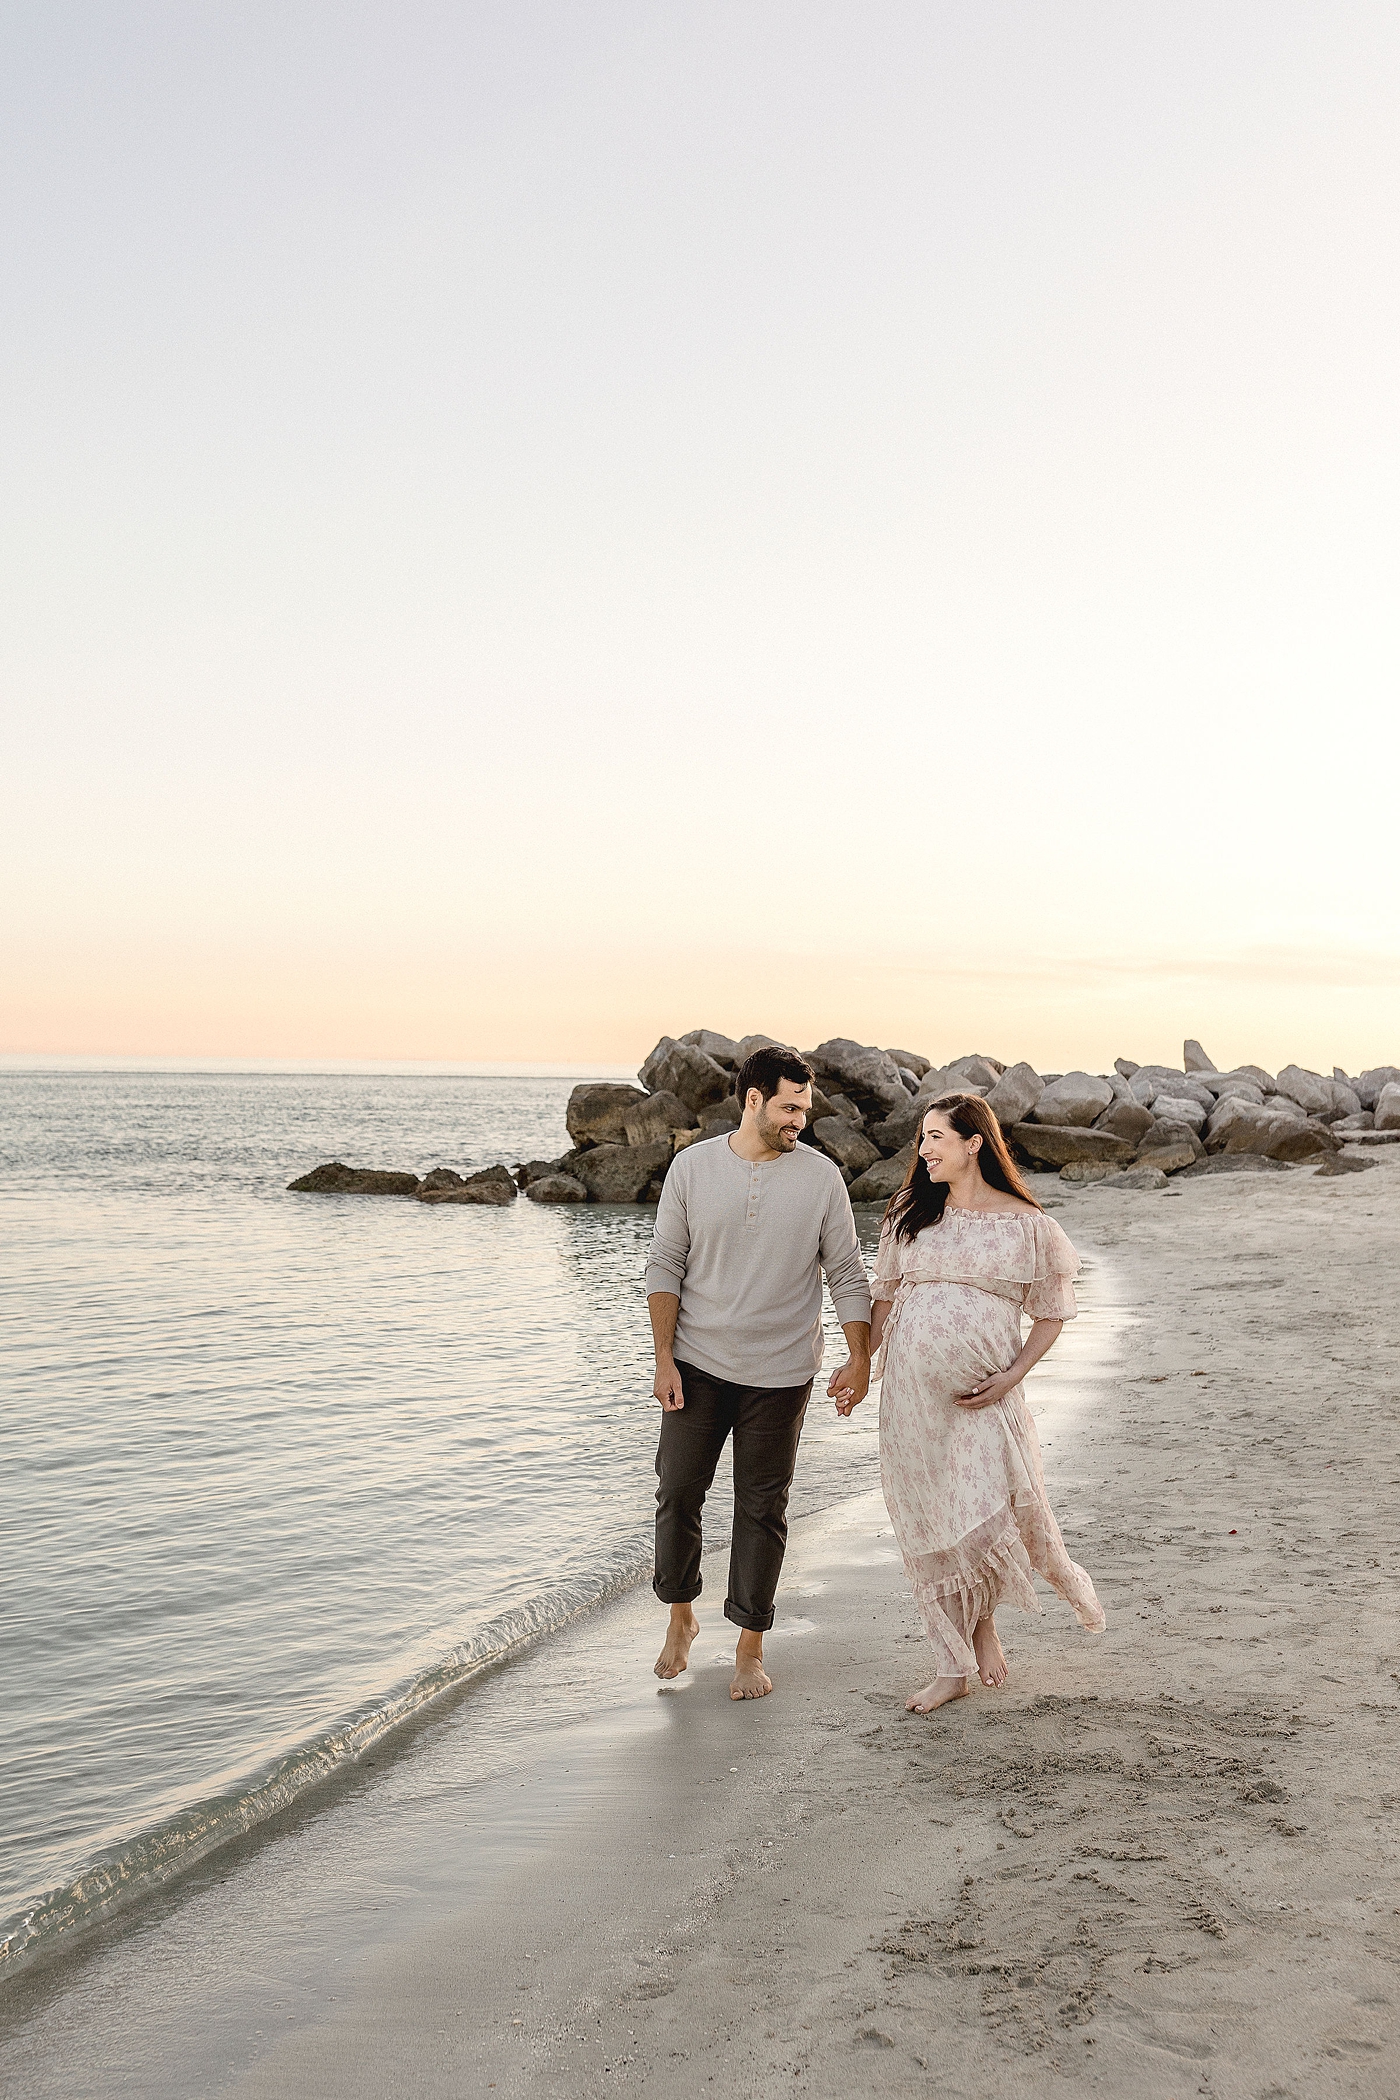 Mom and Dad share in excitement for their new baby while walking along the water's edge at El Farito Beach Miami FL. Photo by Ivanna Vidal Photography.